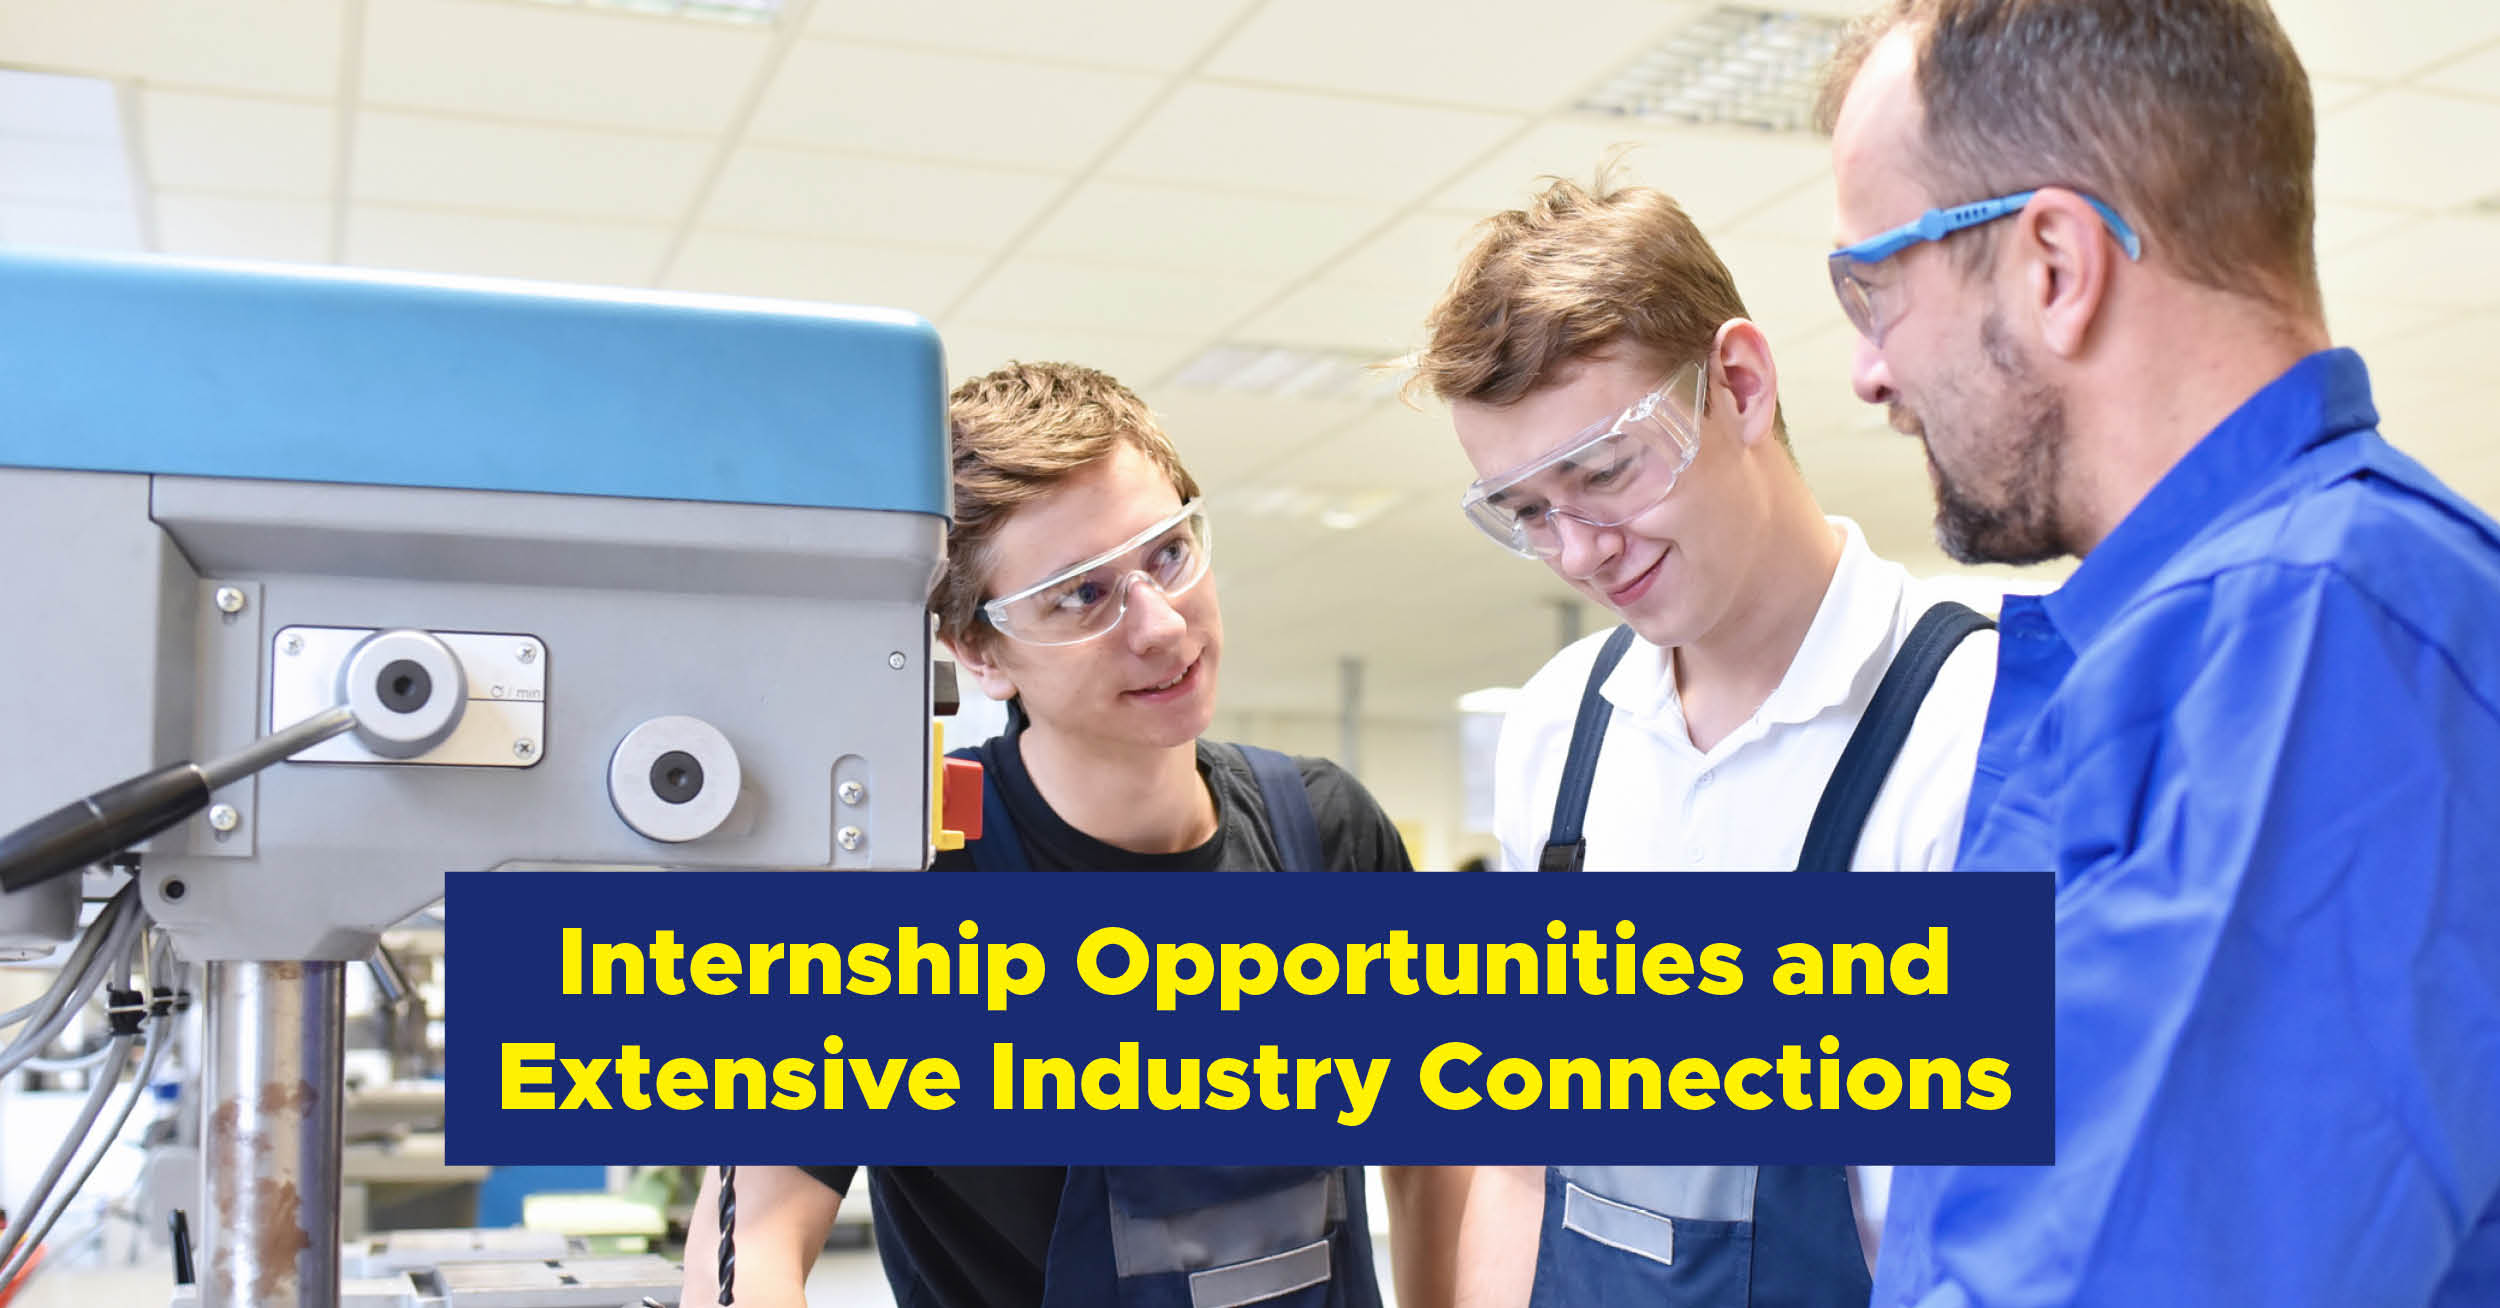 2. Internship Opportunities and Extensive Industry Connections